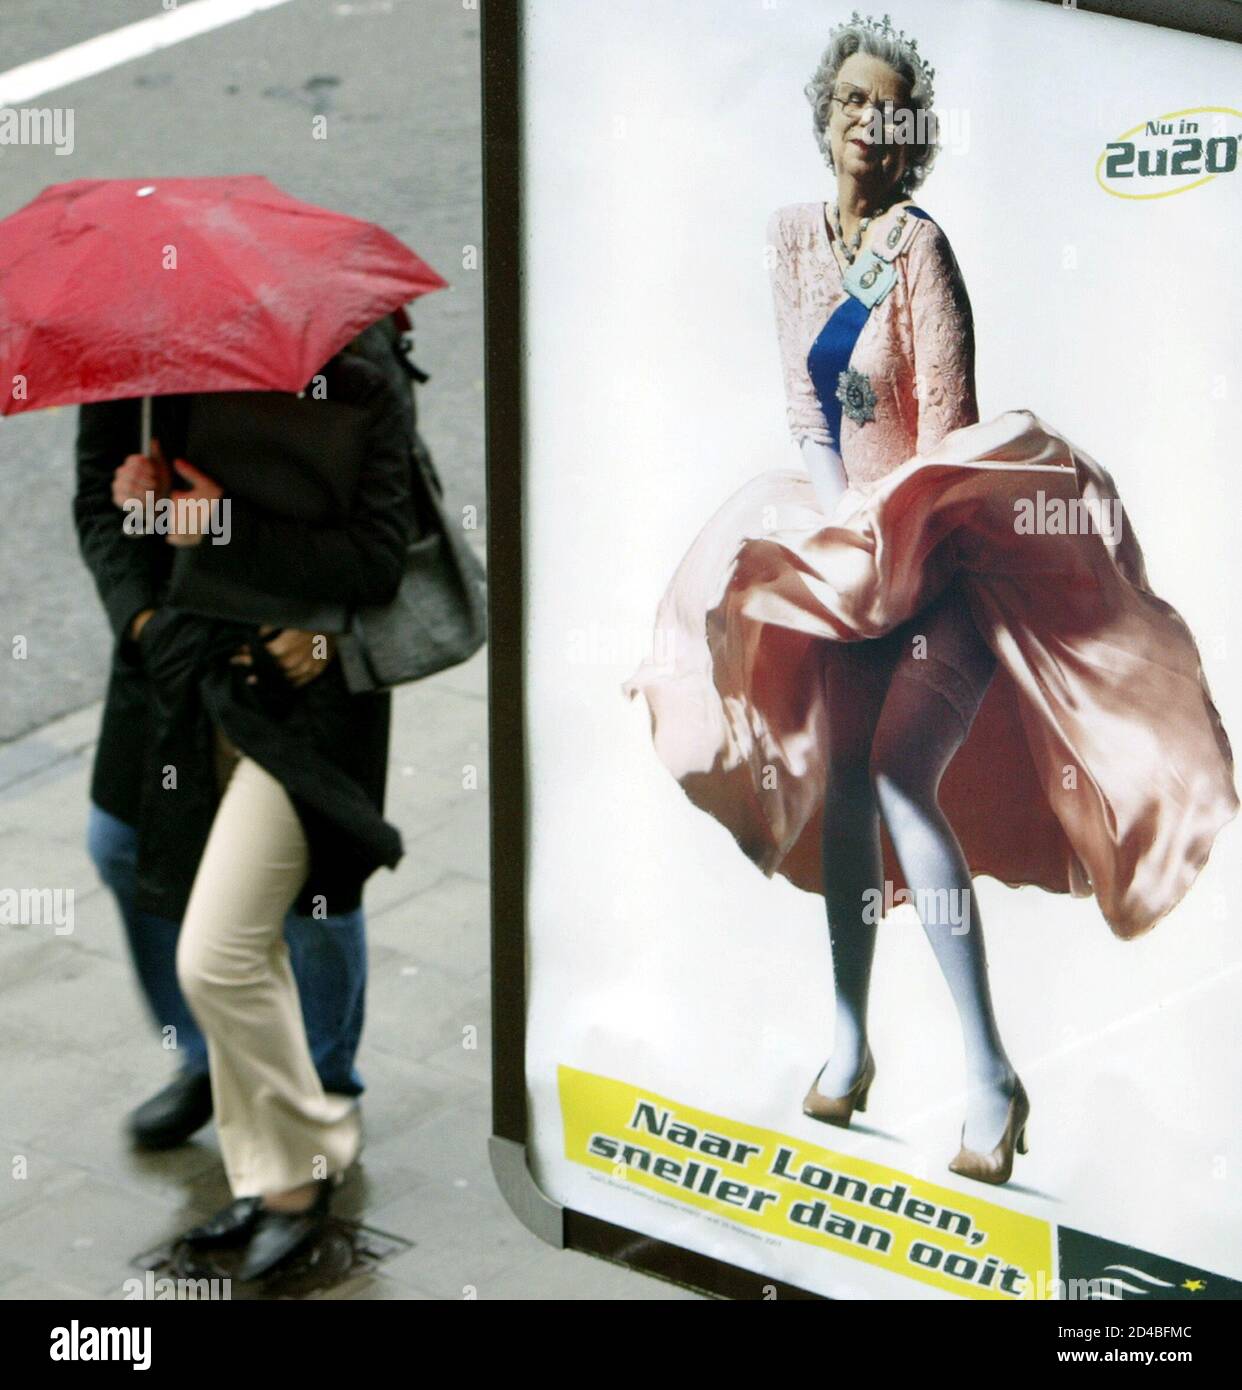 Pedestrians walk past a billboard advertising Eurostar's rail service showing British Queen Elizabeth II holding her dress in a [Marilyn Monroe] pose, in central Brussels, October 3, 2003. The picture, advertising a faster schedule for trains running from Brussels to London, can be seen all over the city. Stock Photo